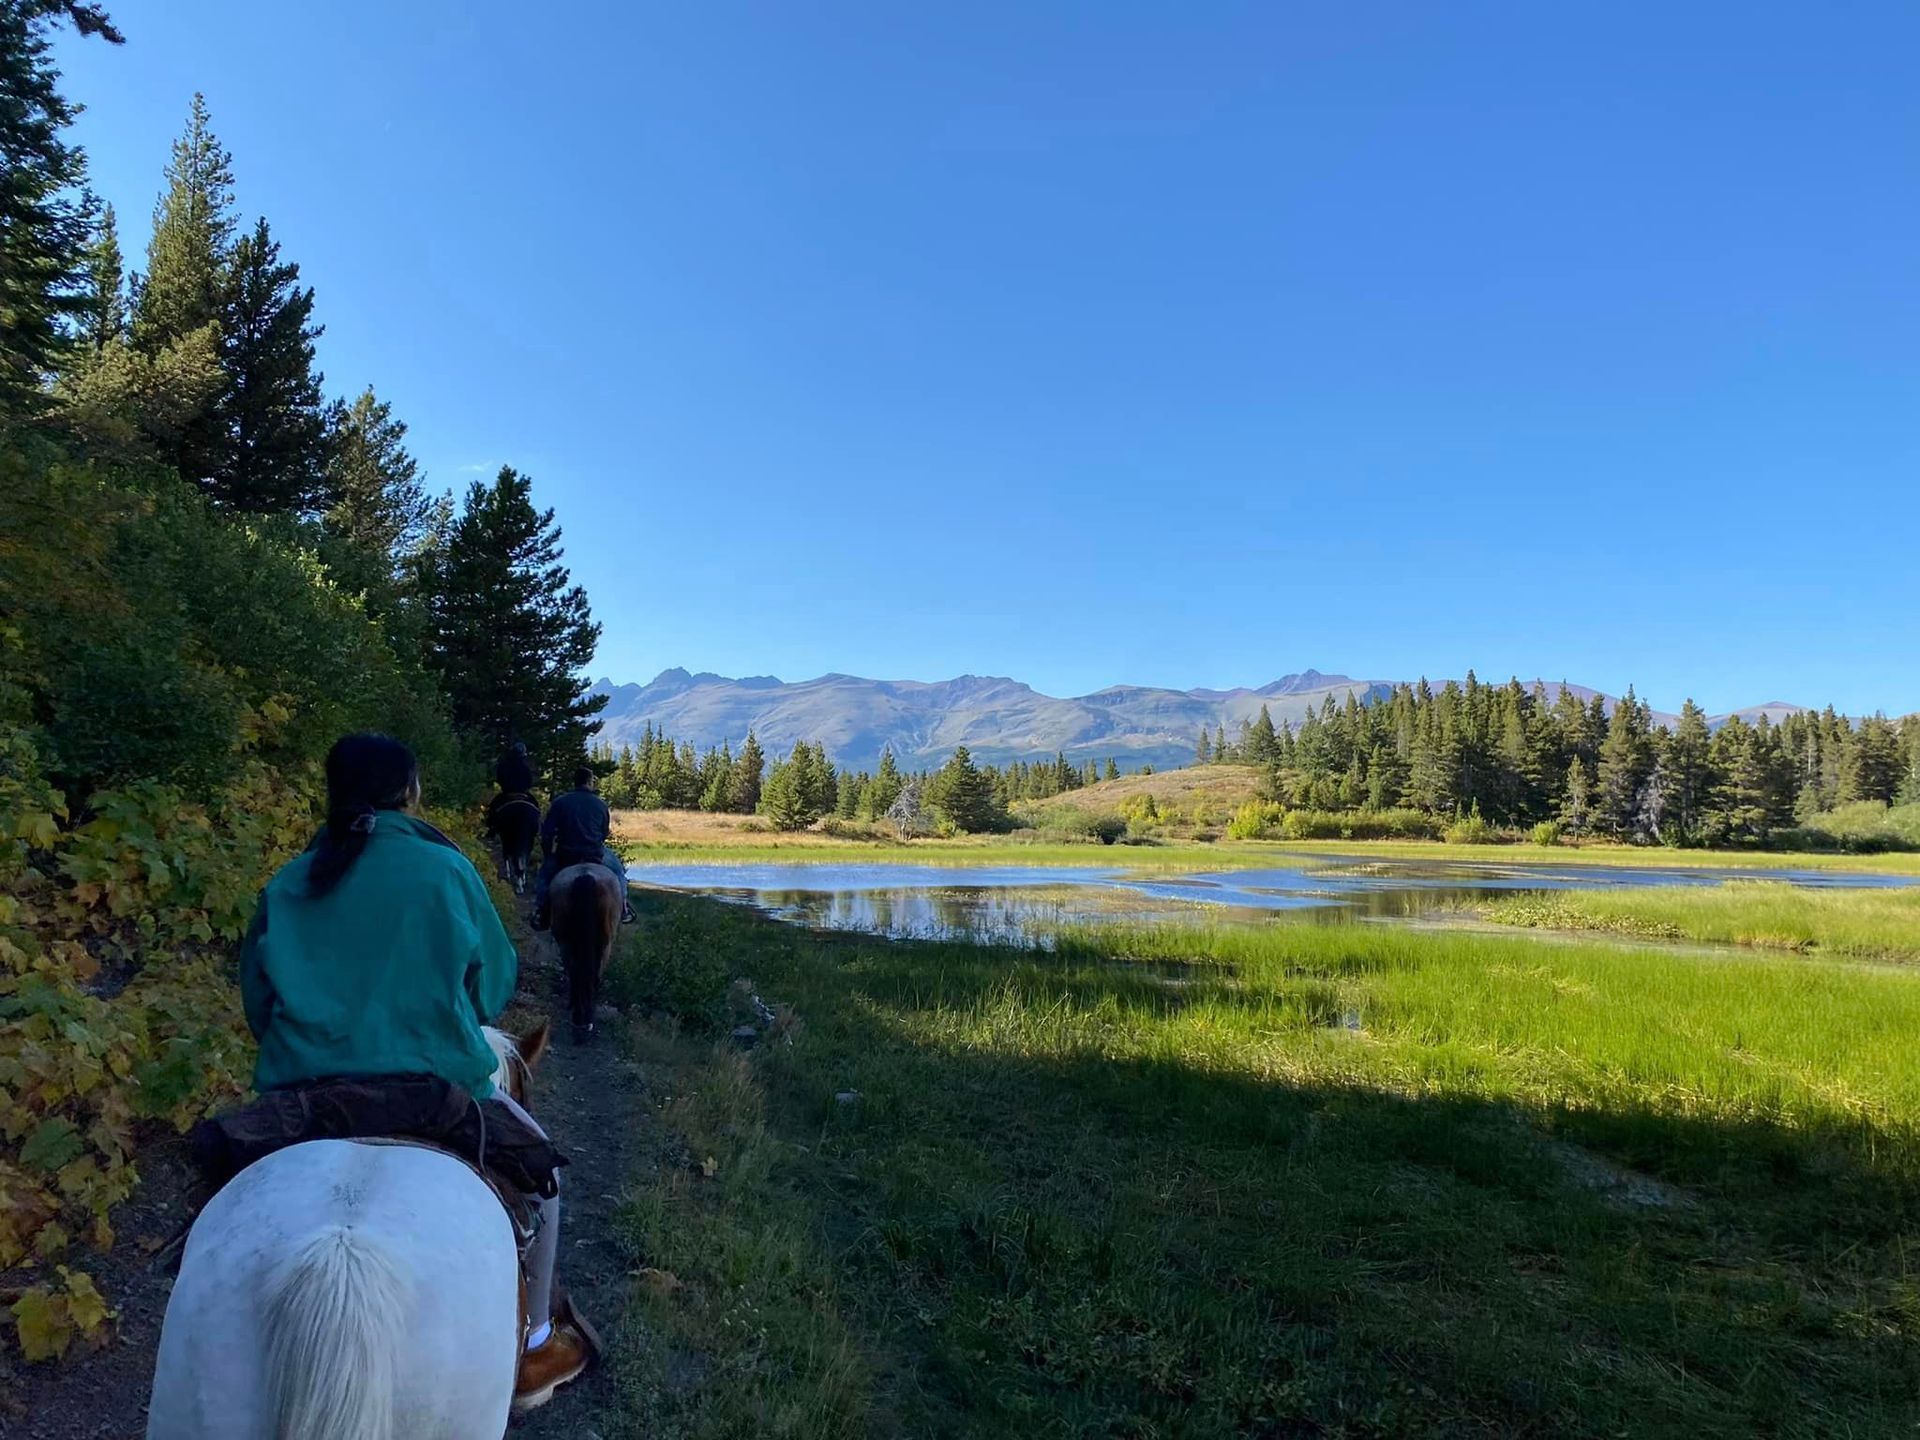 Group of People Riding Horses in a Beautiful Scenery